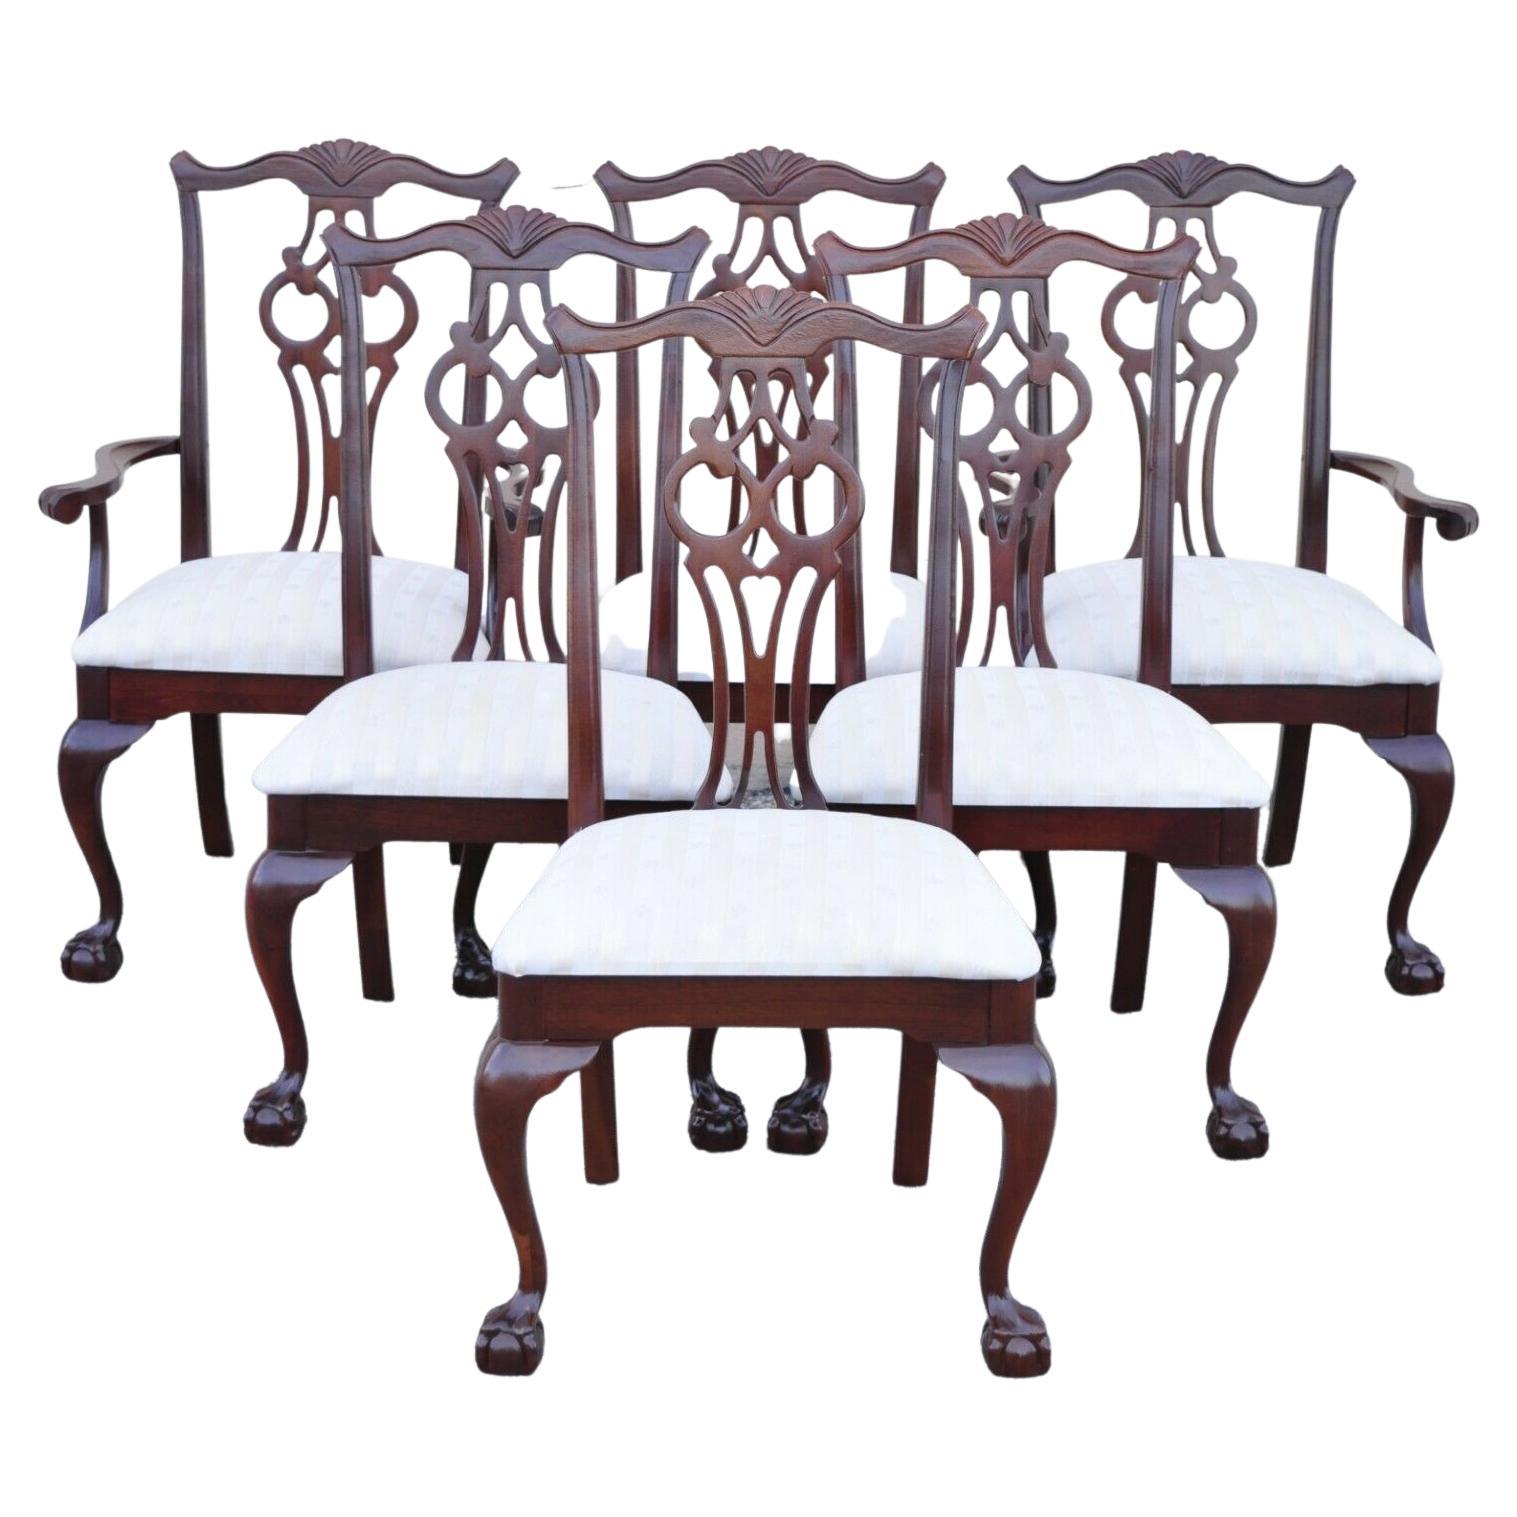 Vintage American Drew Cherry Wood Chippendale Style Dining Chairs, Set of 6 For Sale